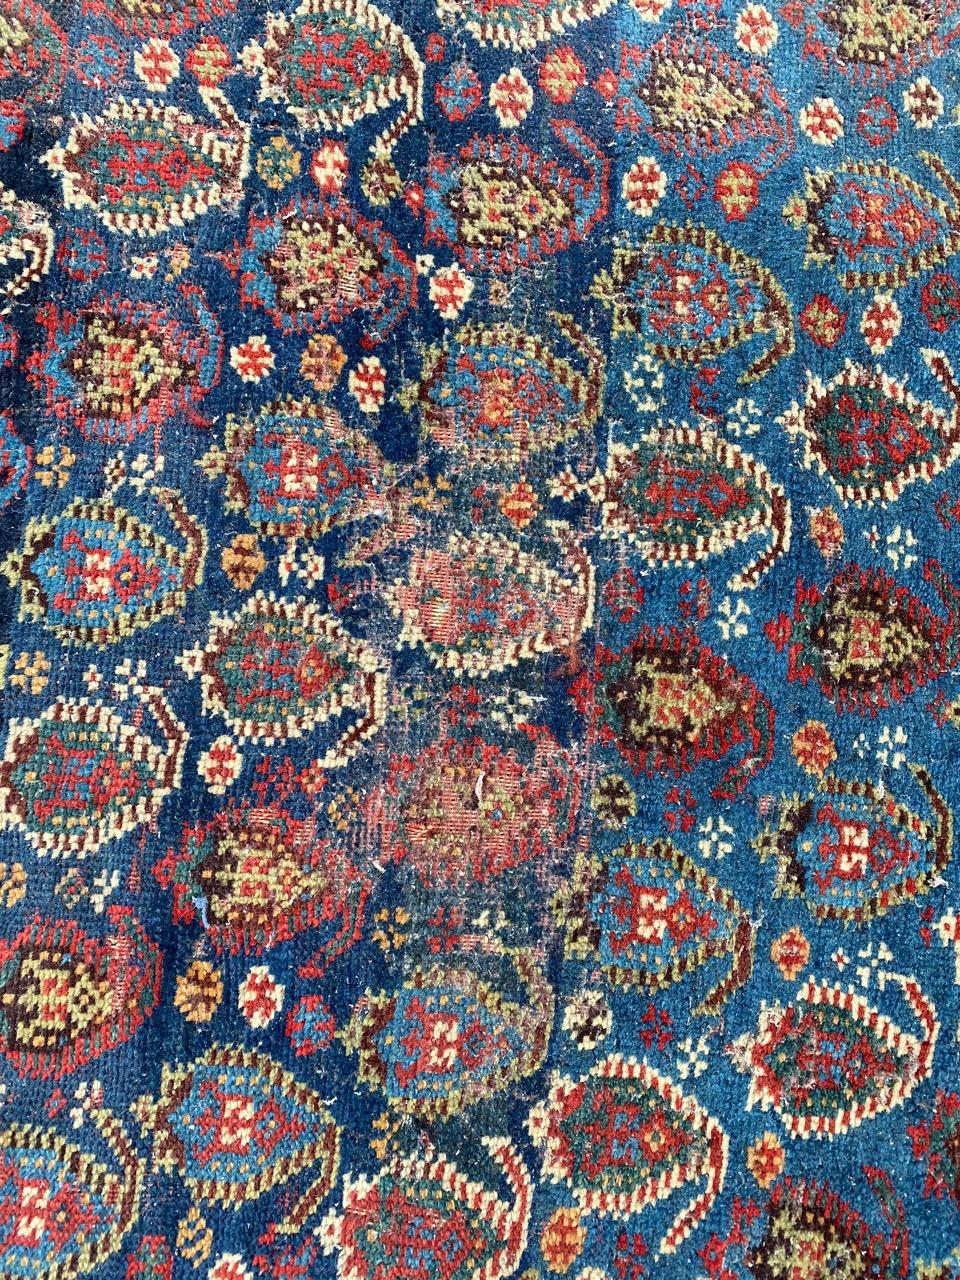 Nice 19th century qashqai rug with beautiful botteh desigh and nice natural colors, entirely and finely hand knotted with wool velvet on wool foundation.

✨✨✨
